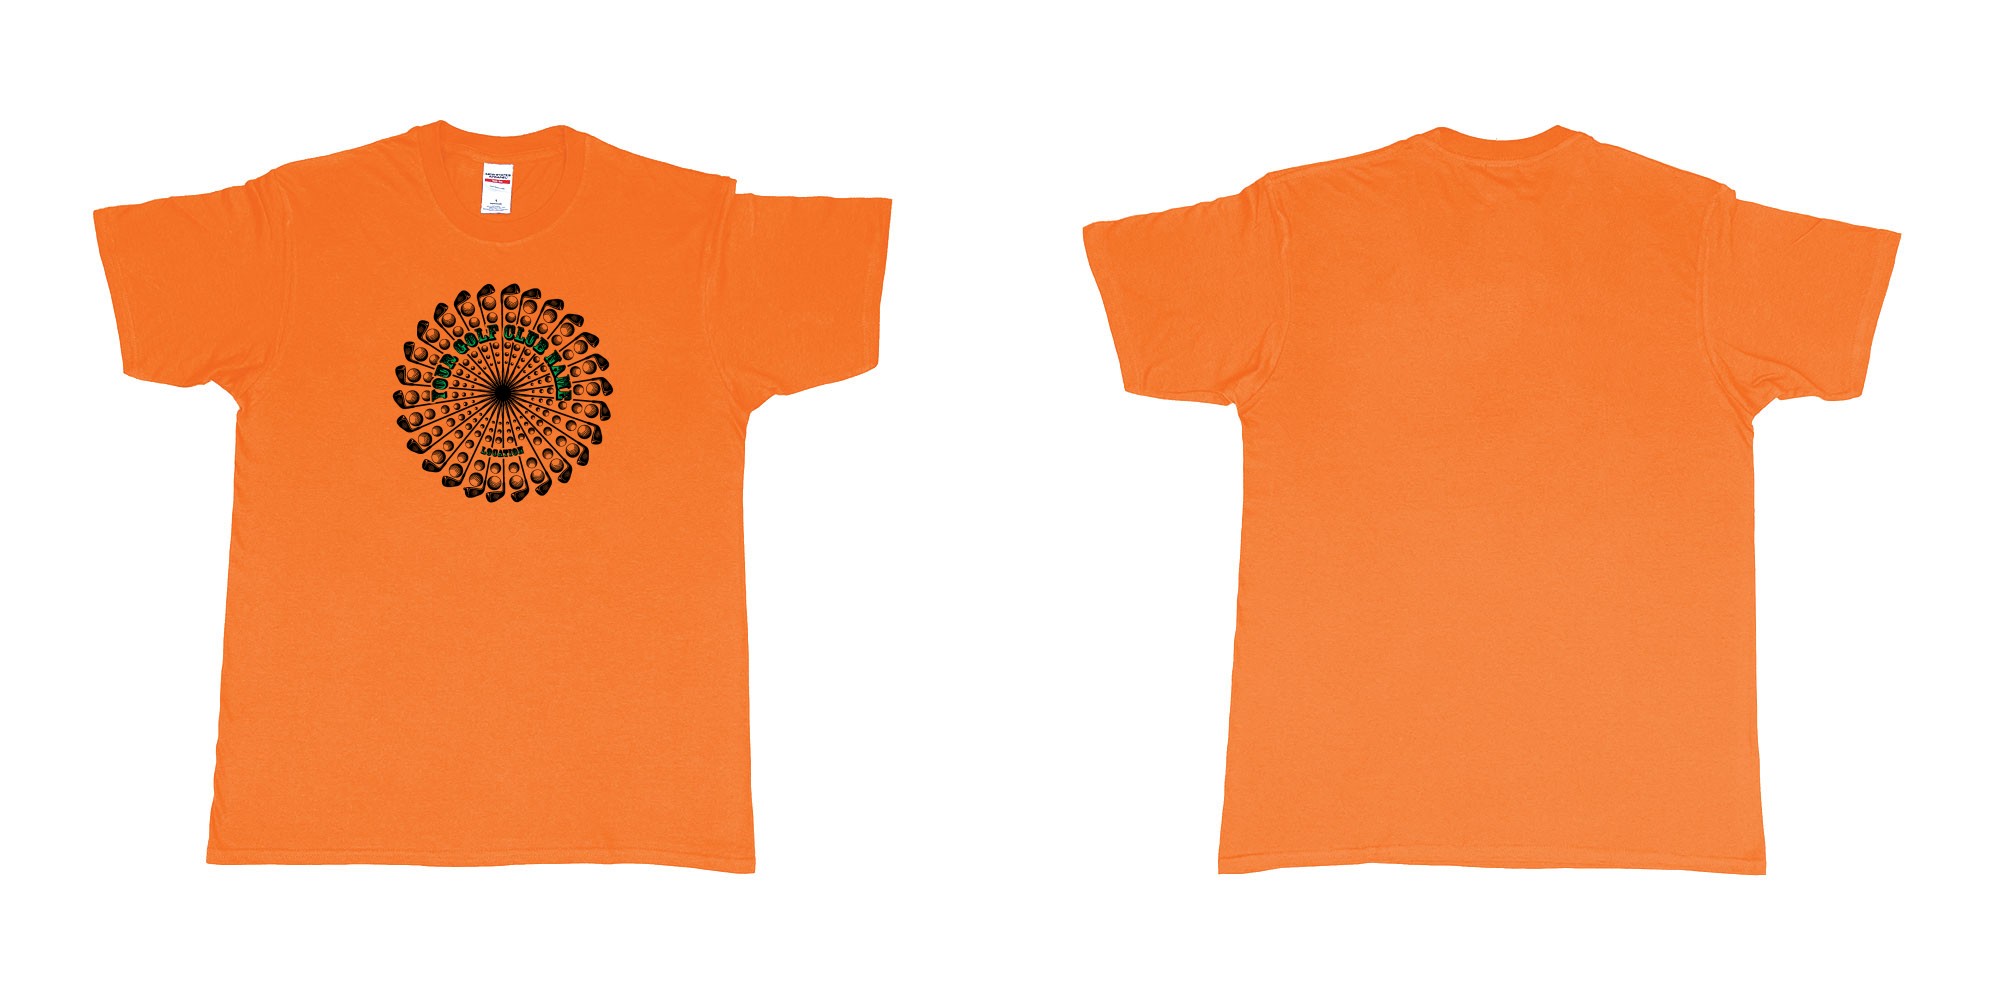 Custom tshirt design golf clubs balls mandala cutoms club name location in fabric color orange choice your own text made in Bali by The Pirate Way